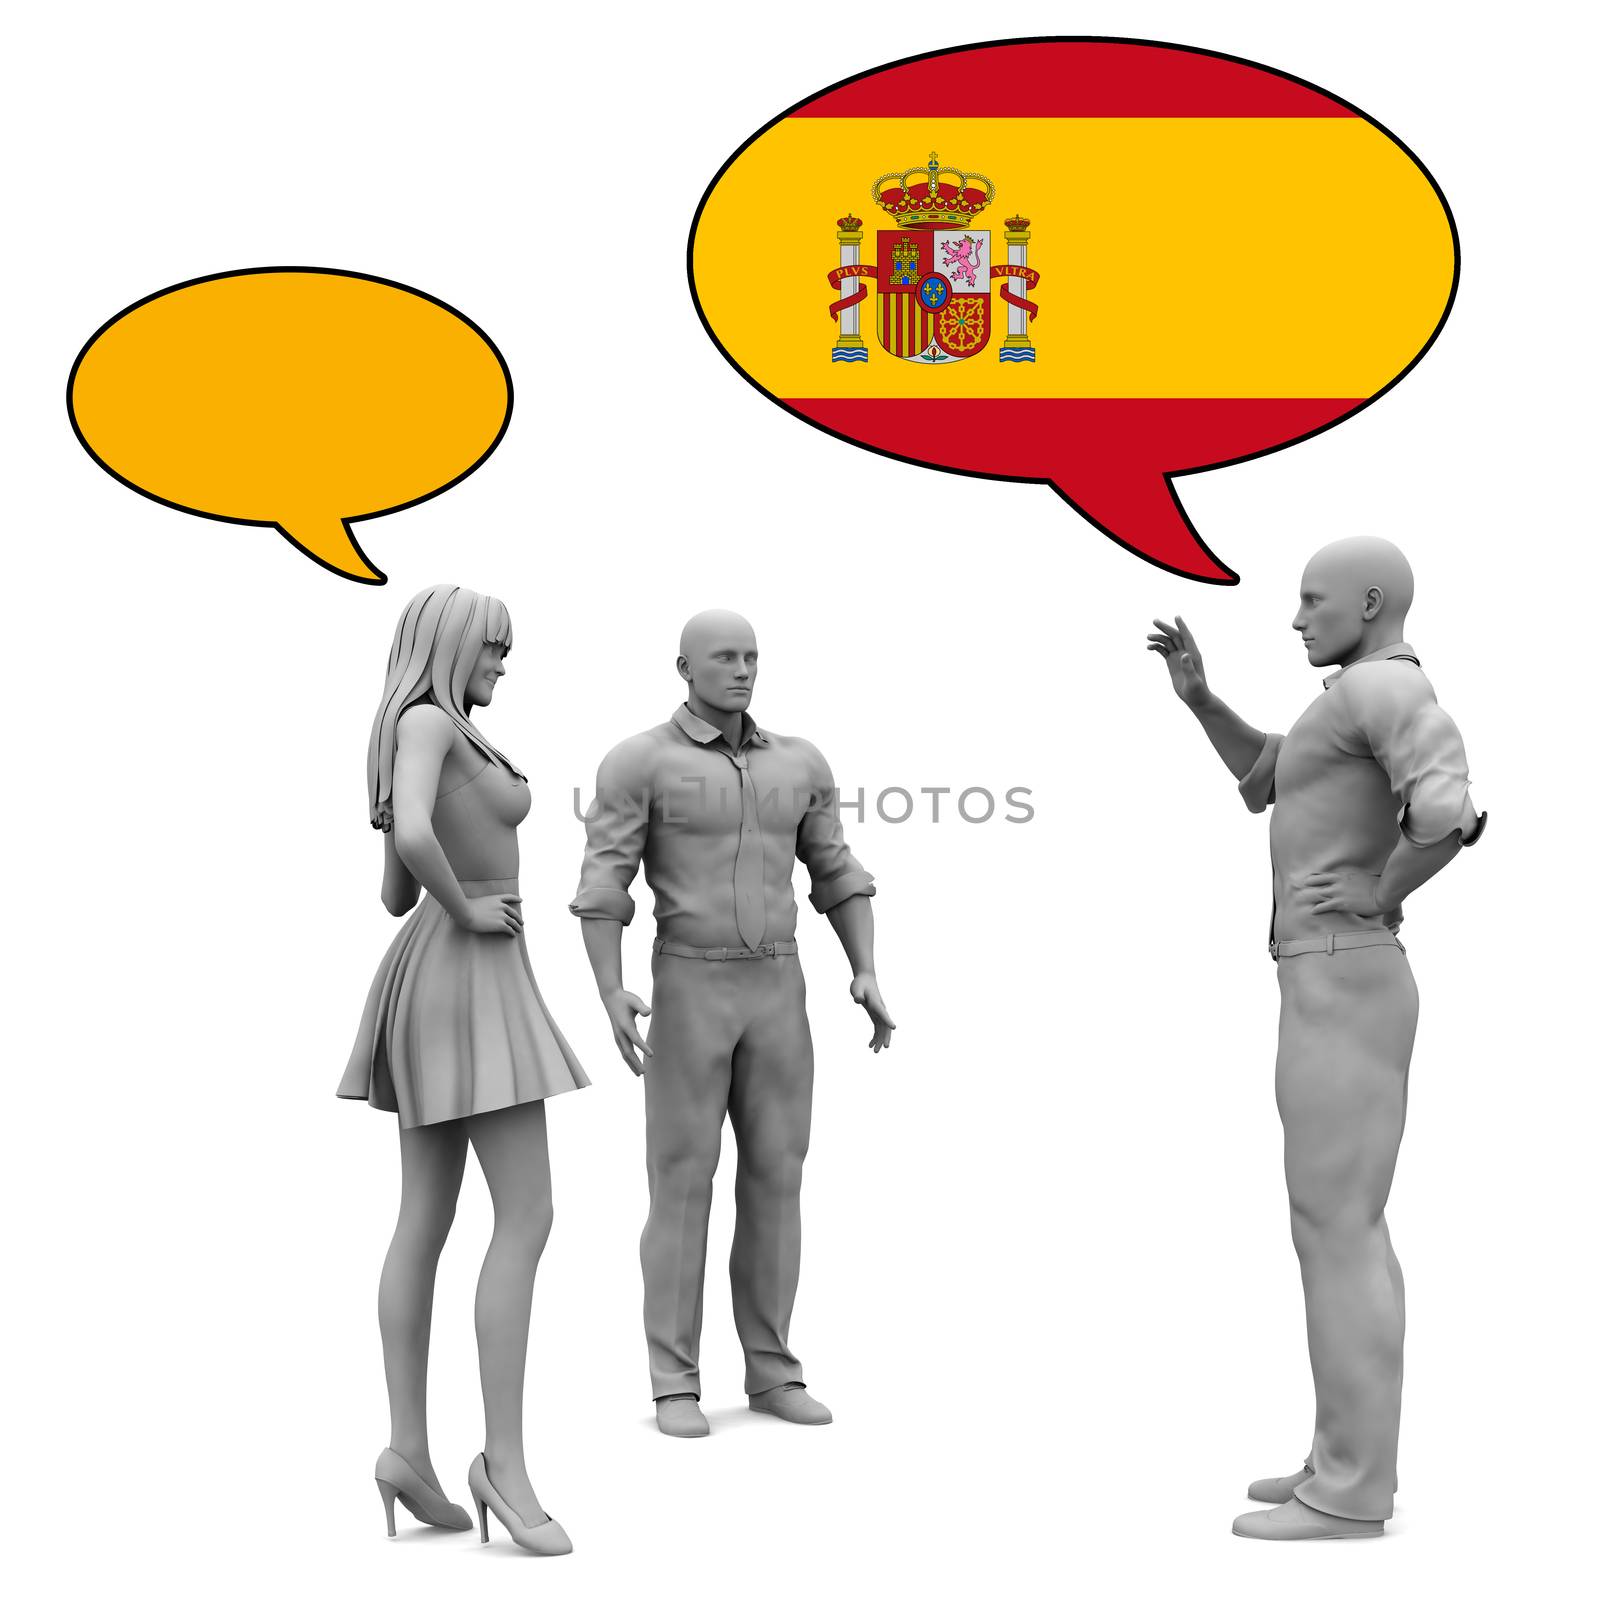 Learn Spanish by kentoh